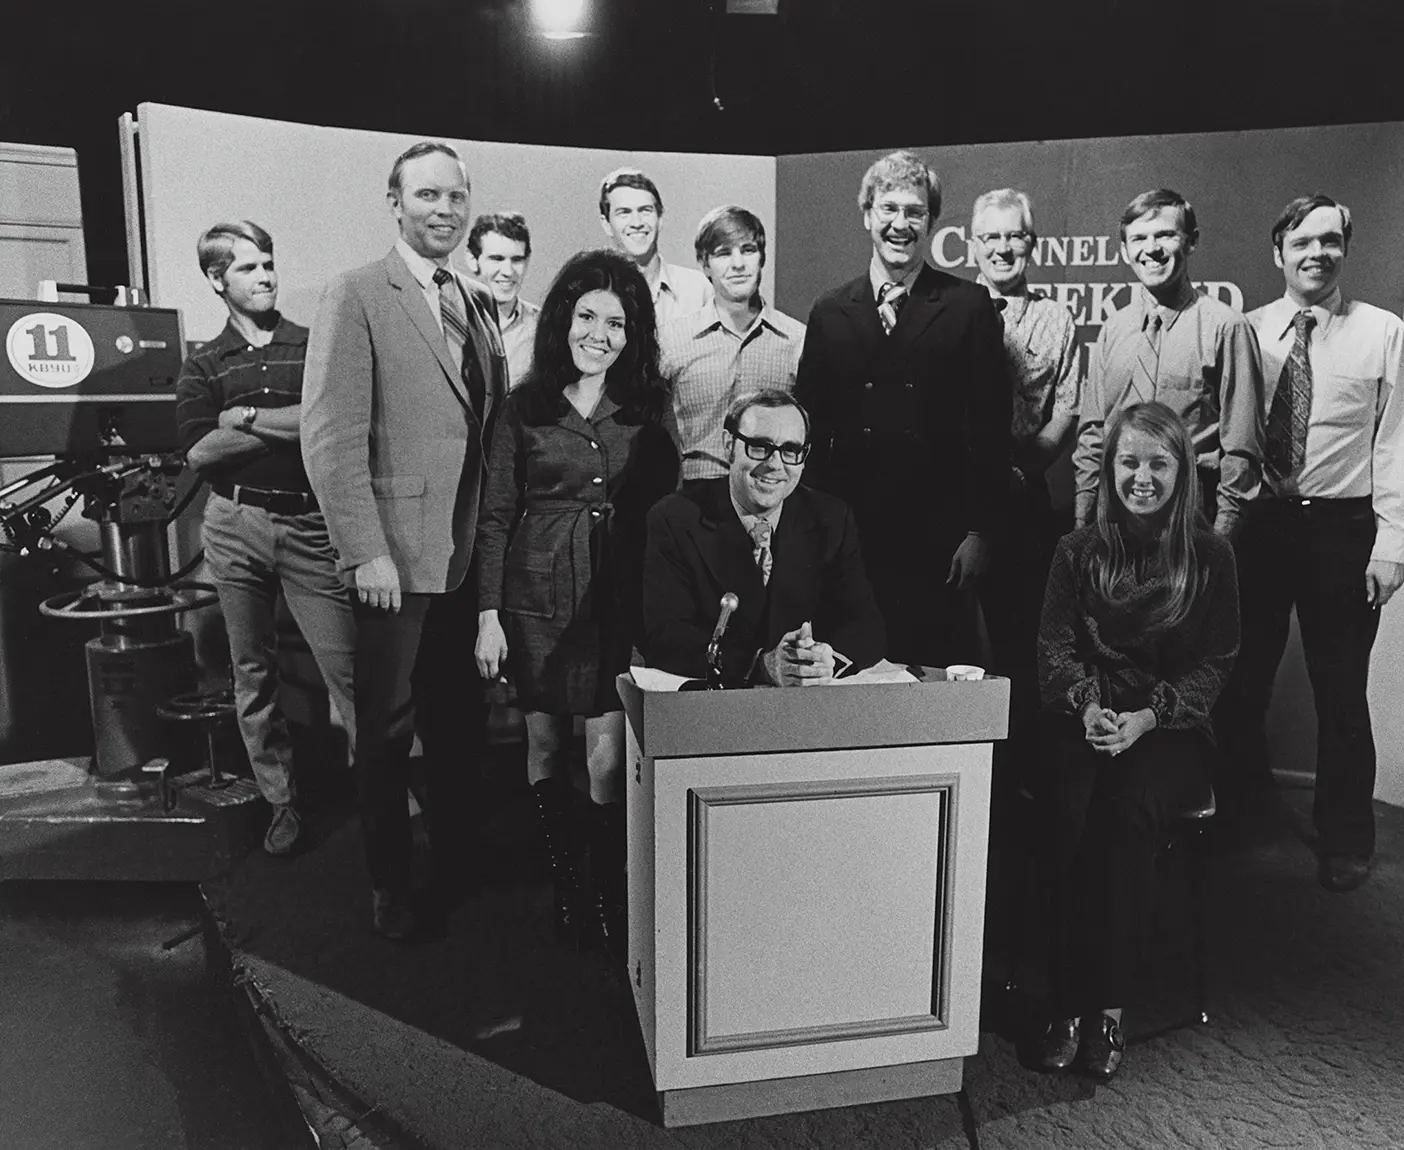 A photo of the team behind KBYU’s Channel 11 Weekend Report.